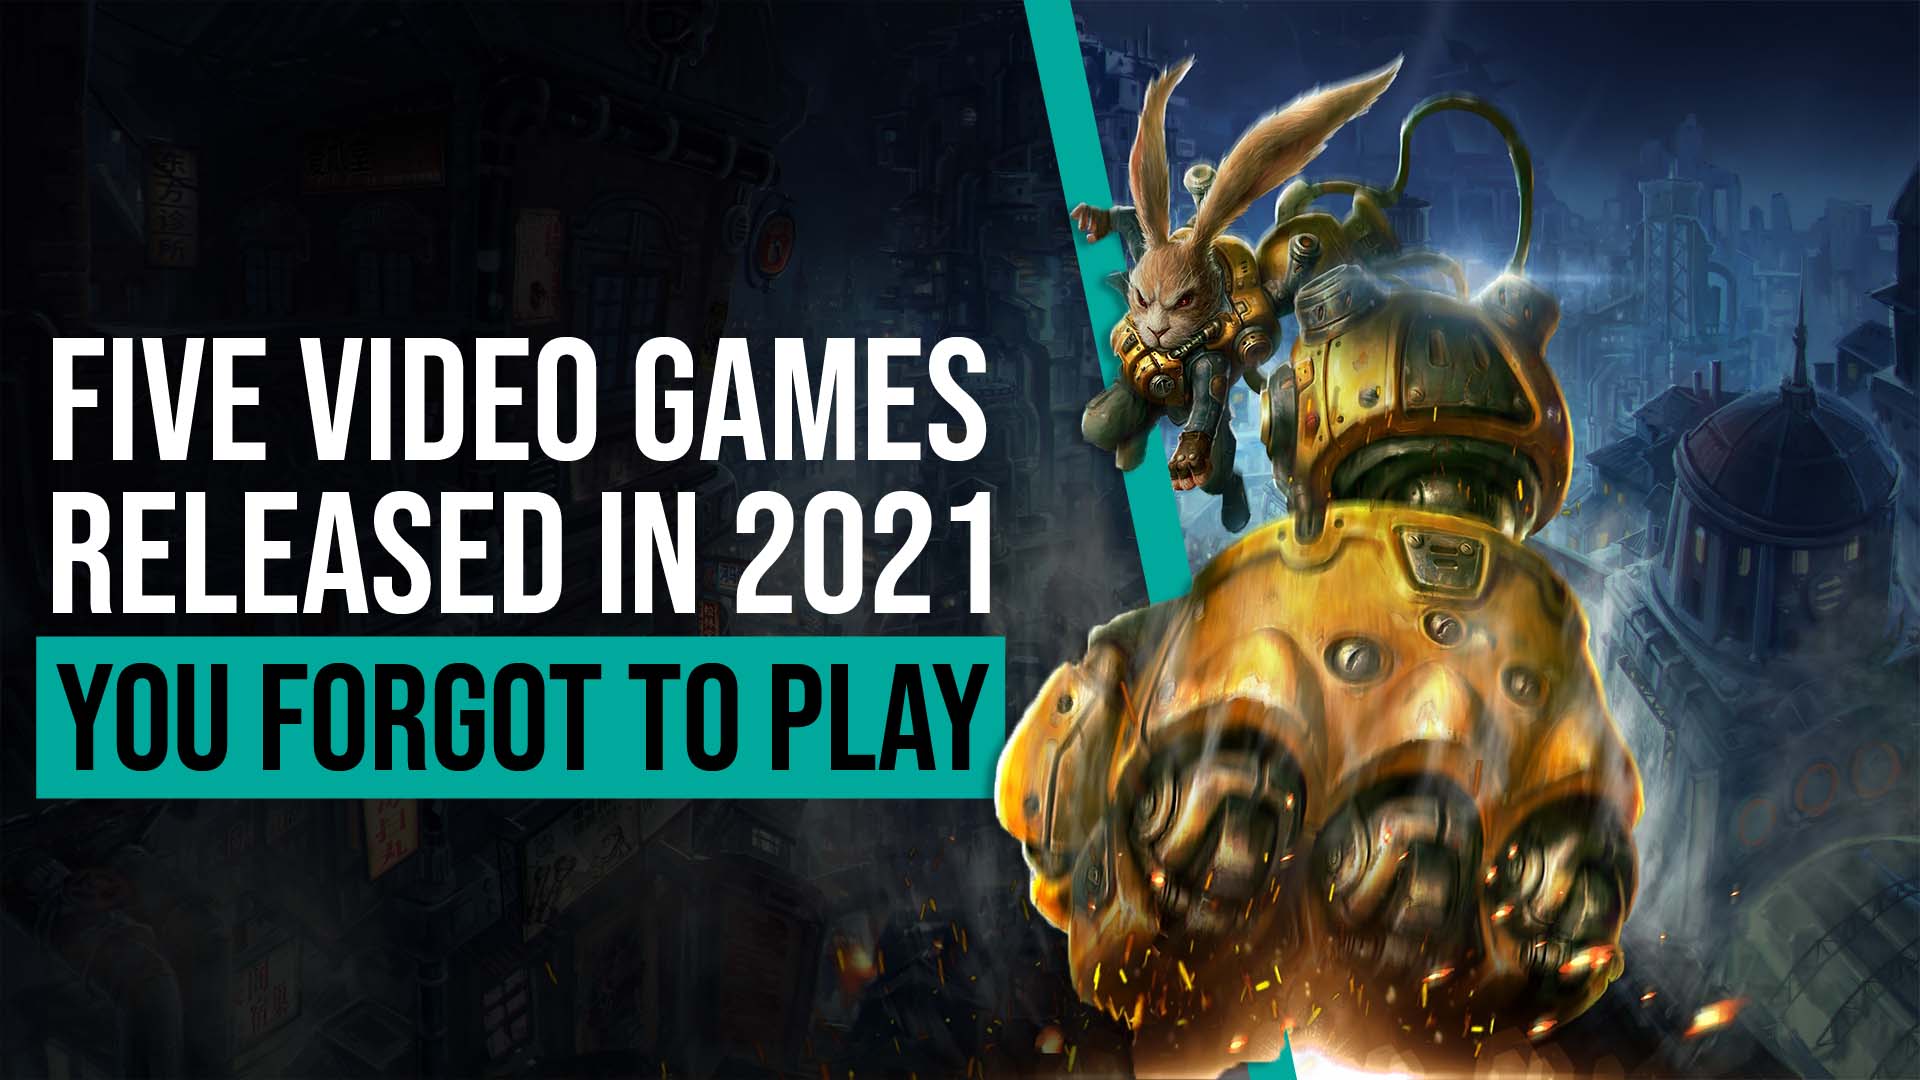 Five Video Games Released in 2021 That You Forgot to Play